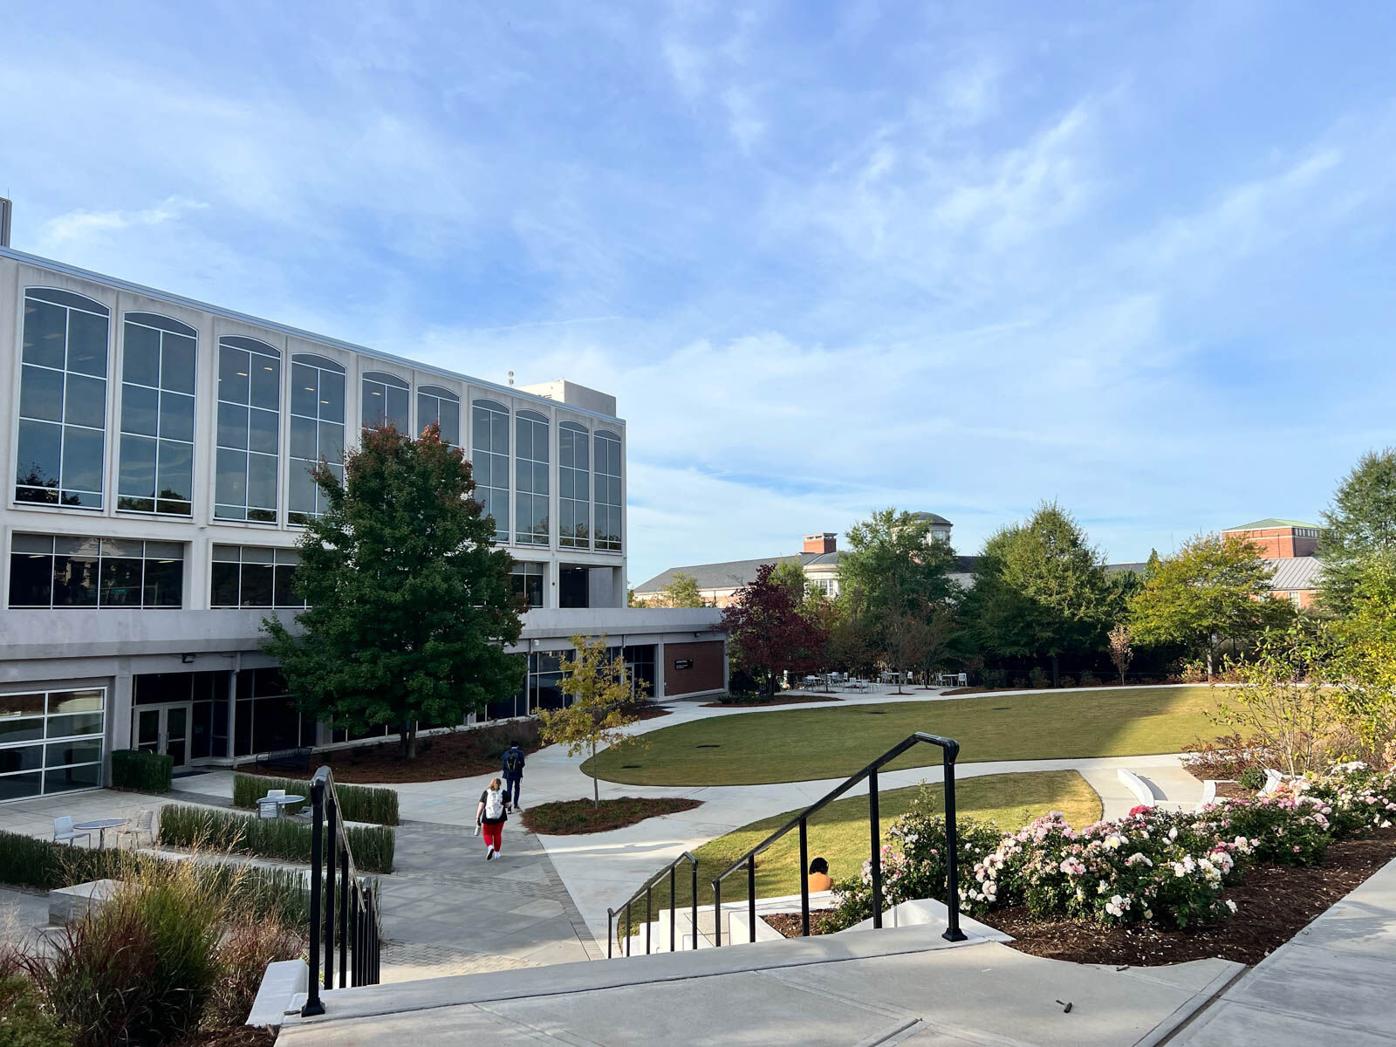 Experiencing the change: Grady's new application requirements, Campus News